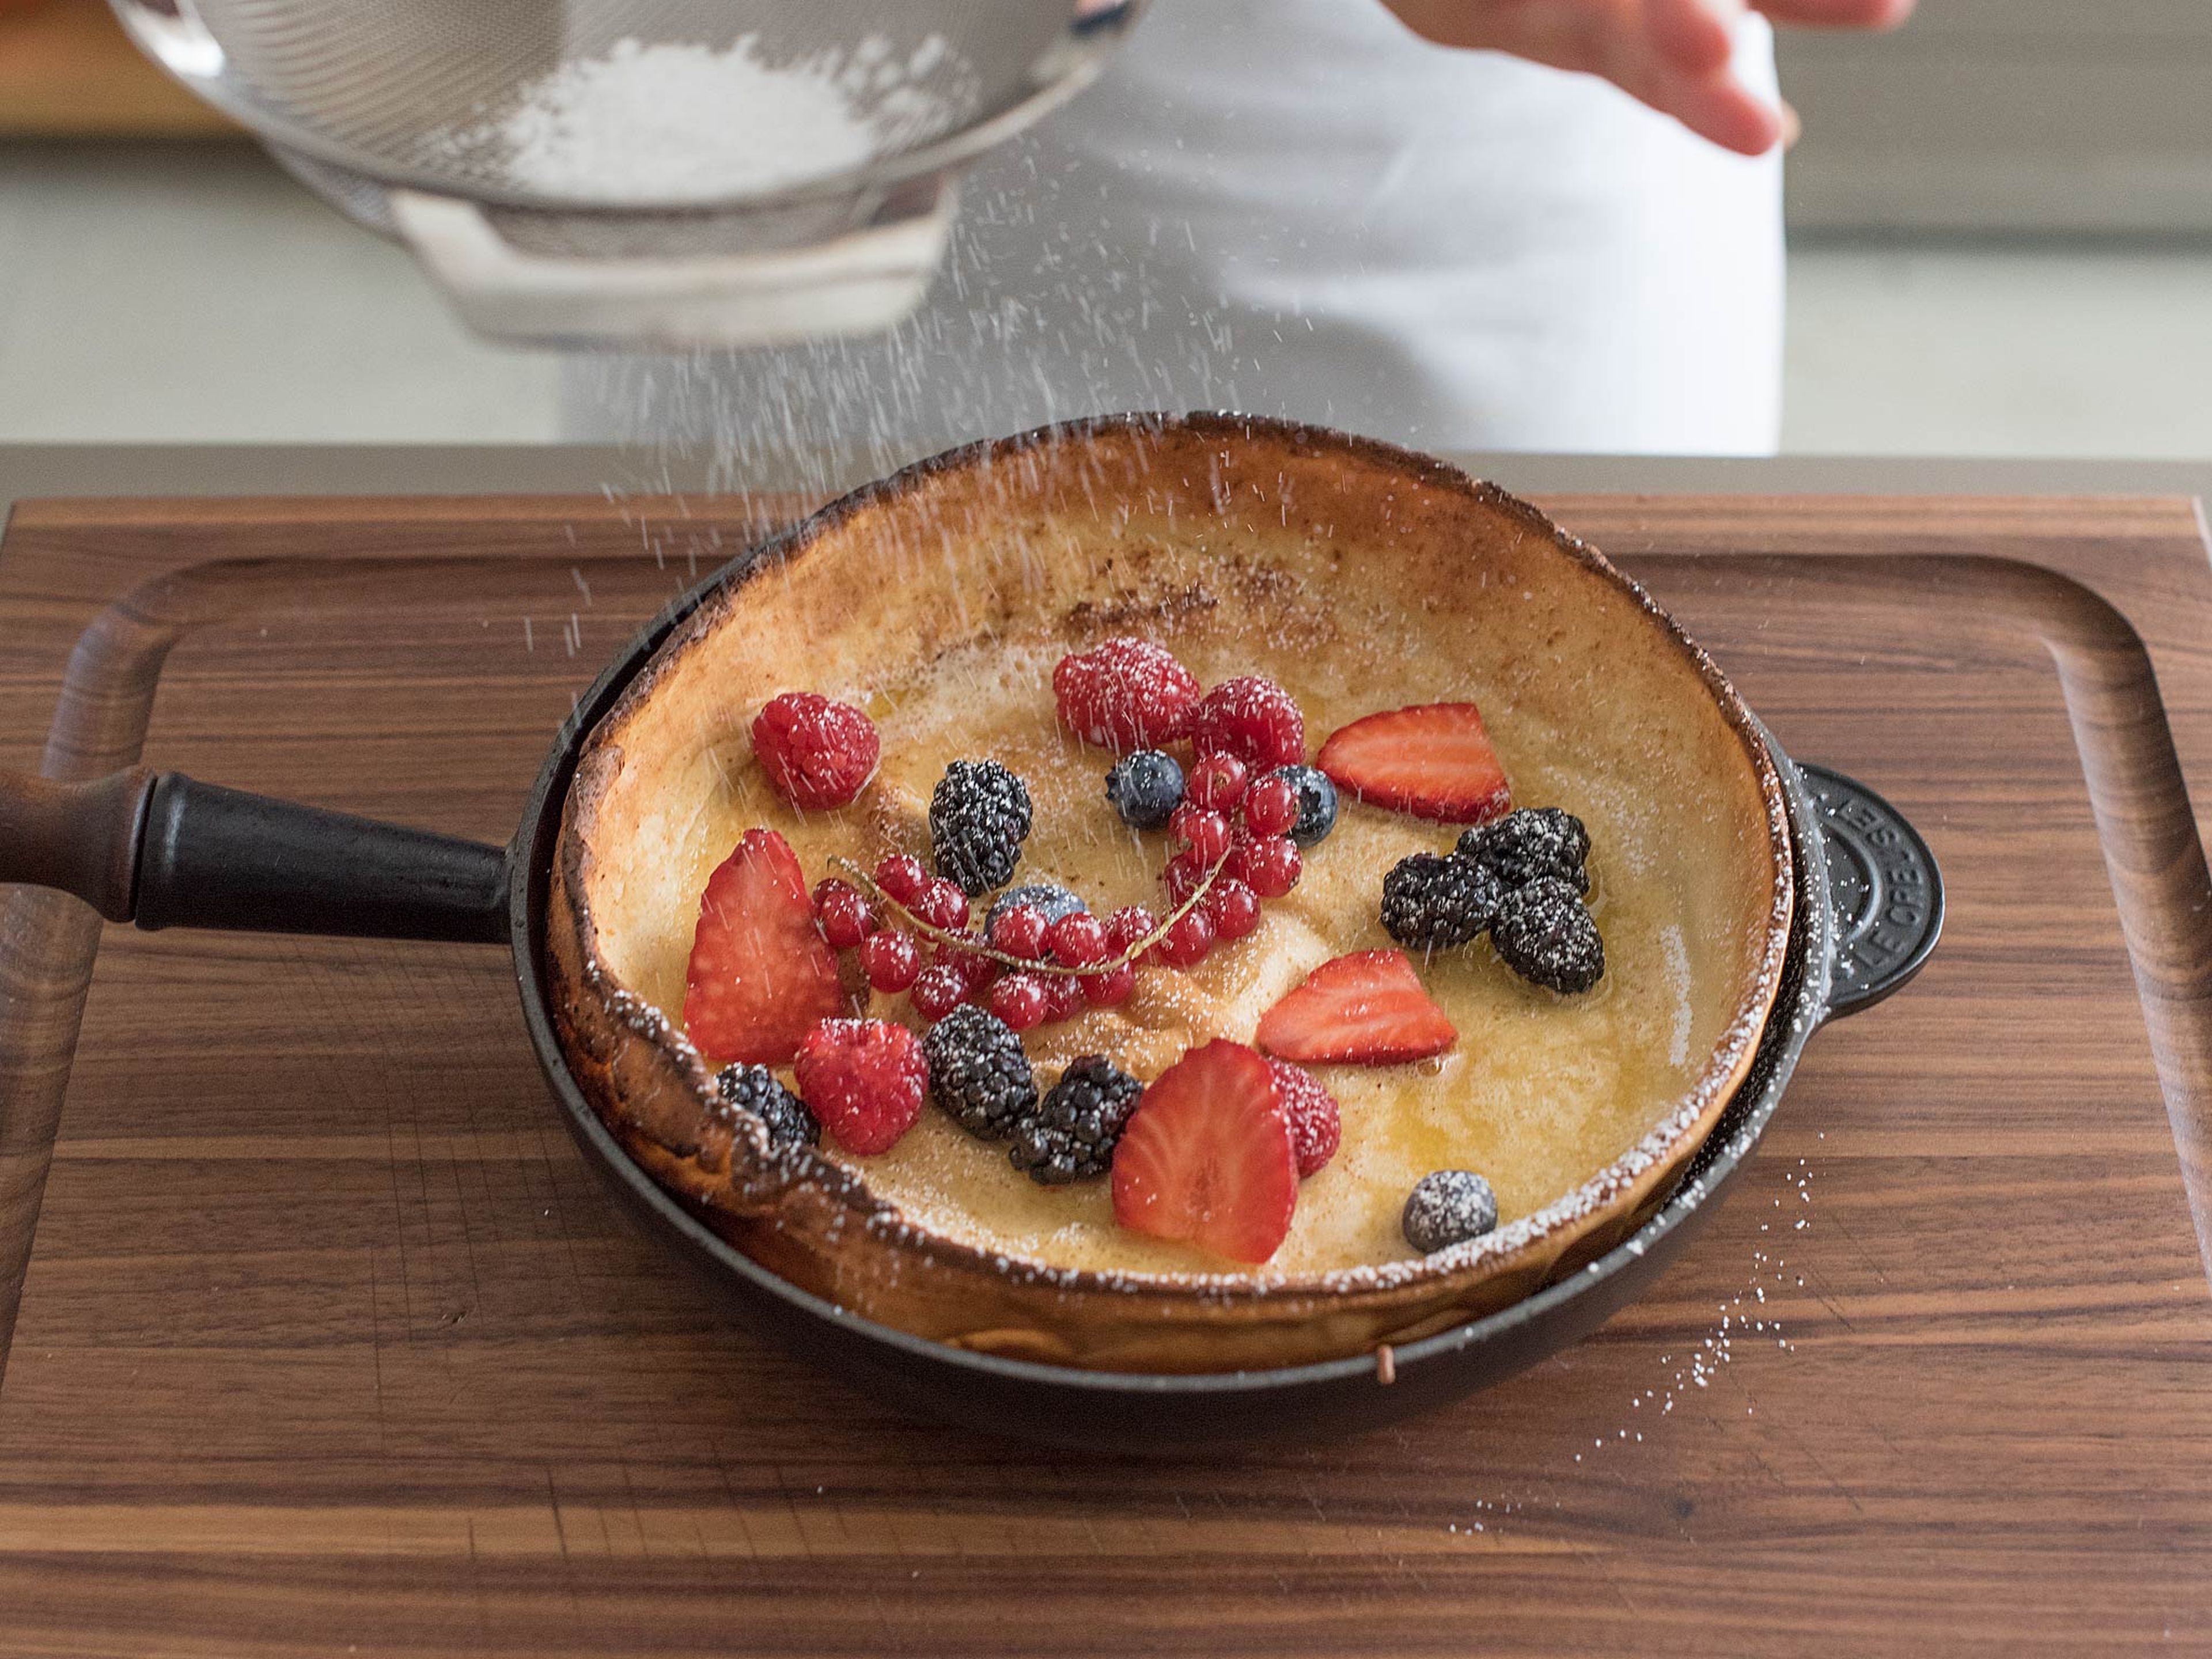 Slide Dutch baby onto serving platter or cutting board, or serve straight from pan, if desired. Top with fresh berries and sprinkle with lemon juice. Dust with confectioner's sugar and cut into wedges for serving. Serve warm with maple syrup.